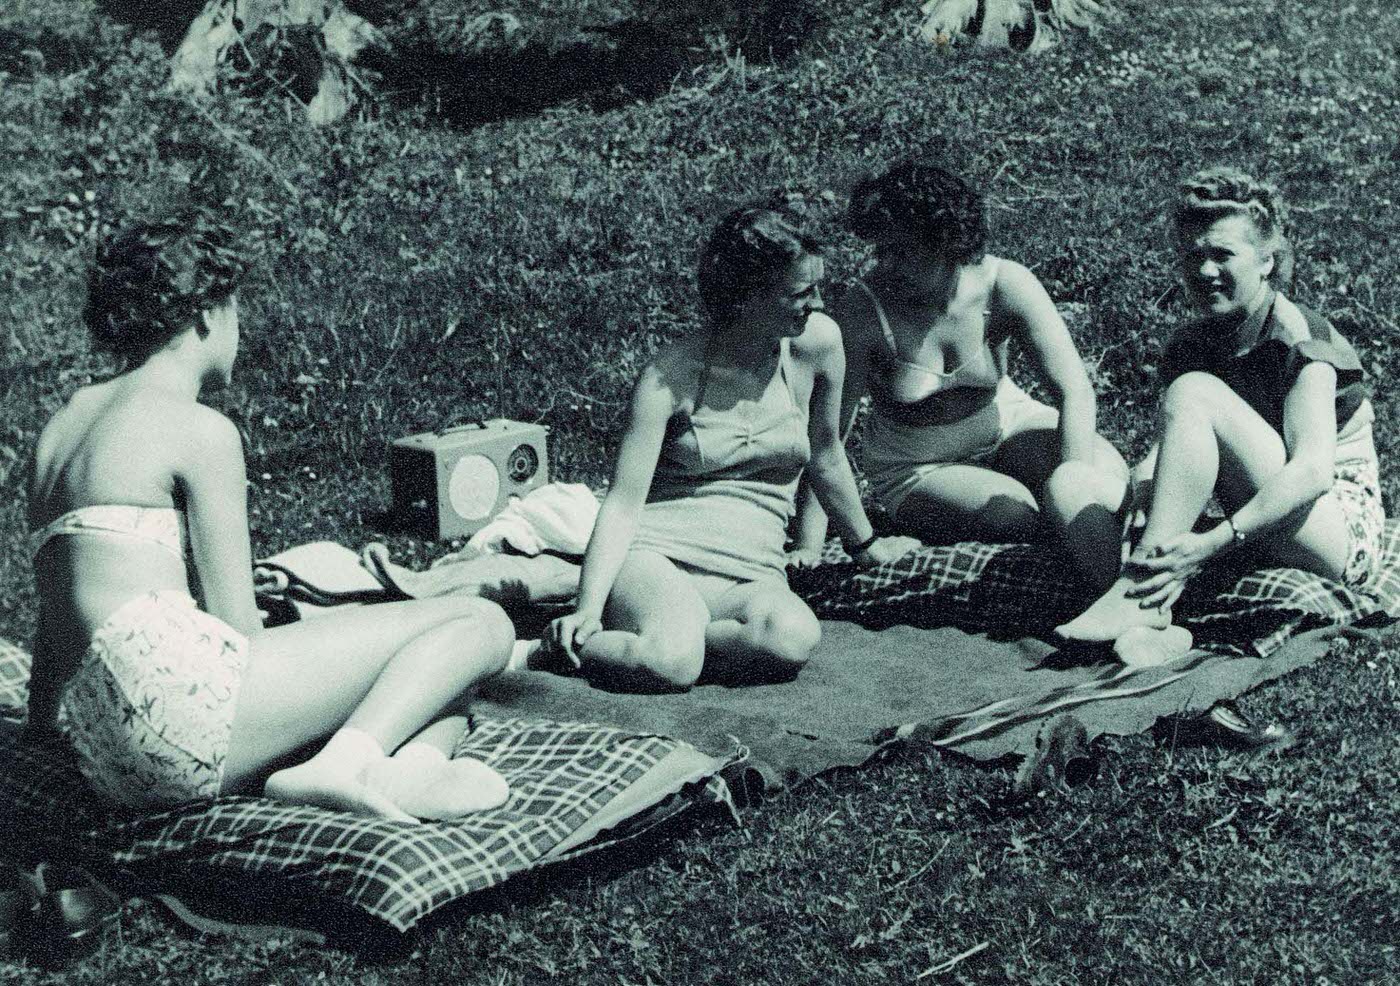 Four girls sitting on a blanket in the grass wearing swimsuits and bikinis, Switzerland, 1948.